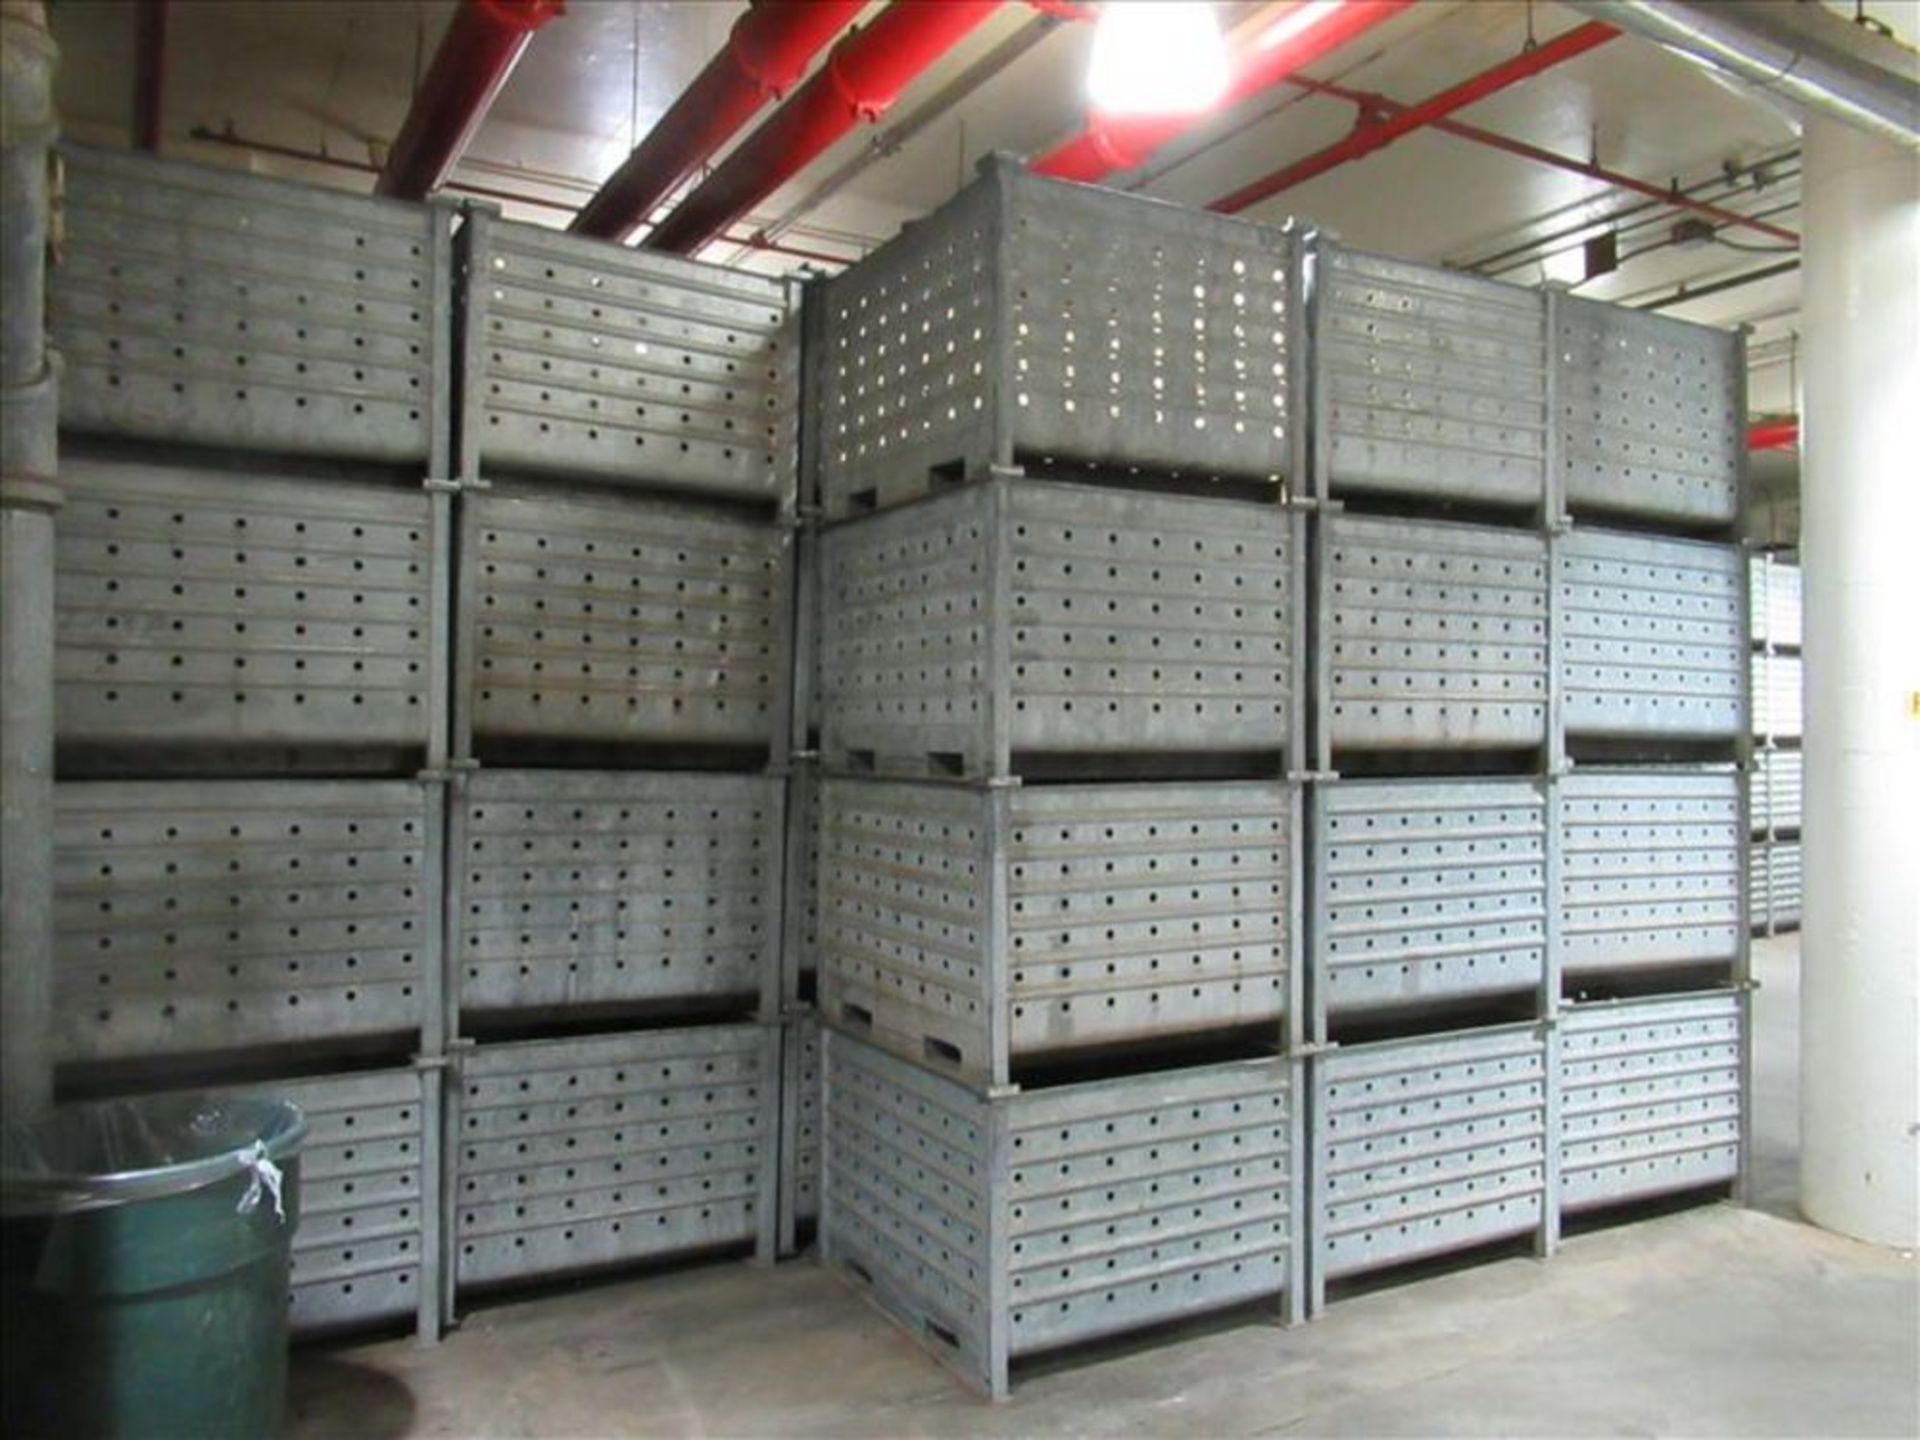 (58) Galvanized bins, corrugated, perforated, stackable [1st Flr Vegetable Receiving Dept]